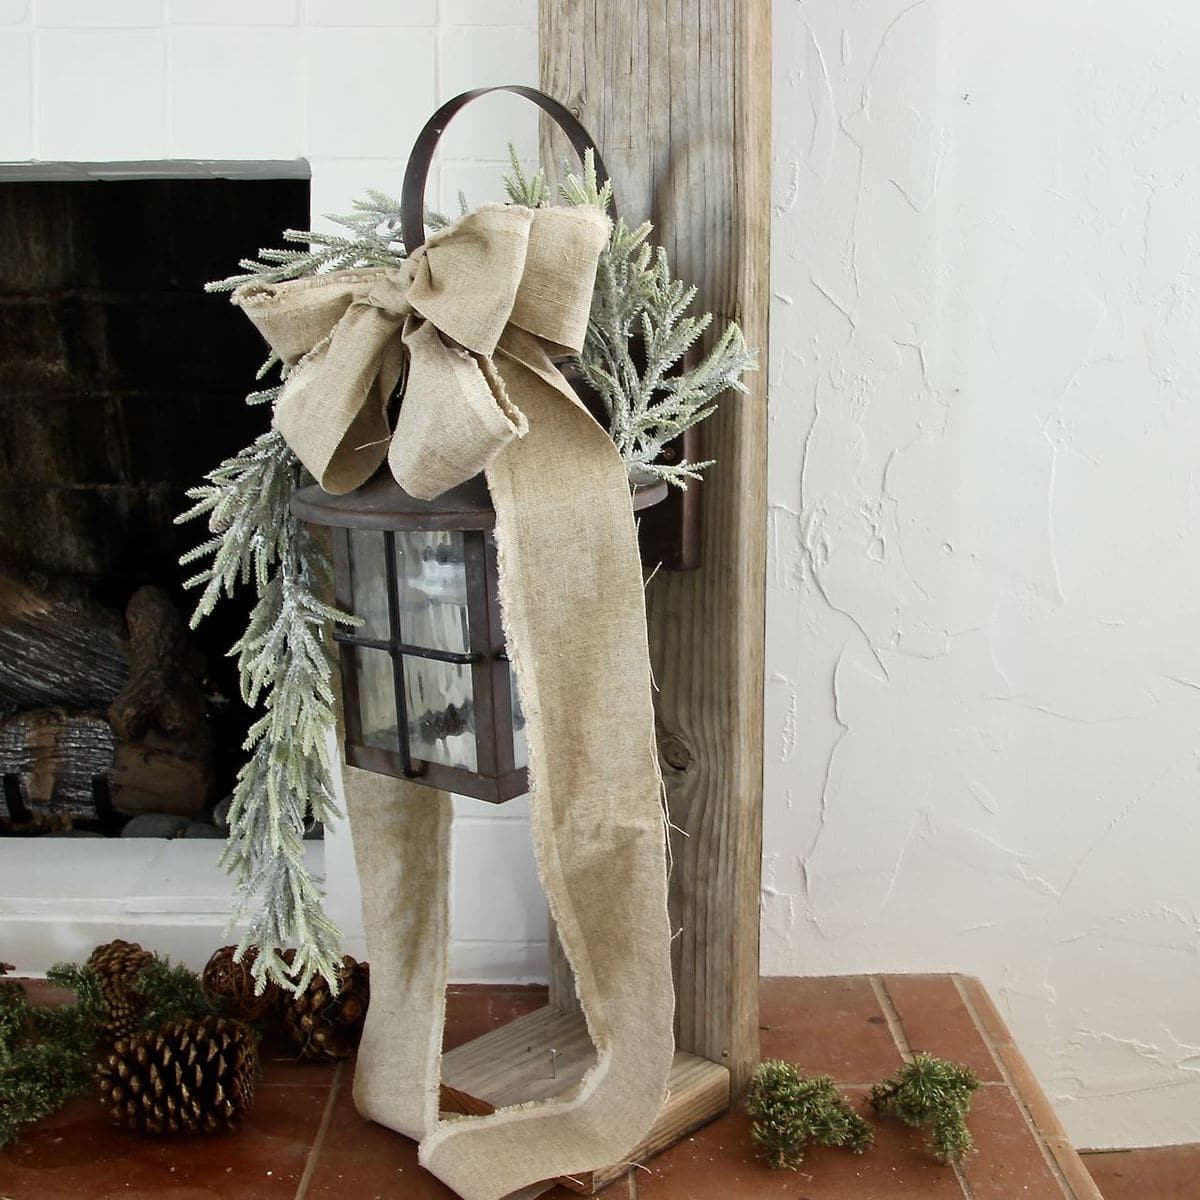 Vintage lantern hanging on a post with a linen bow and a length of greenery cascading from the top of the lantern